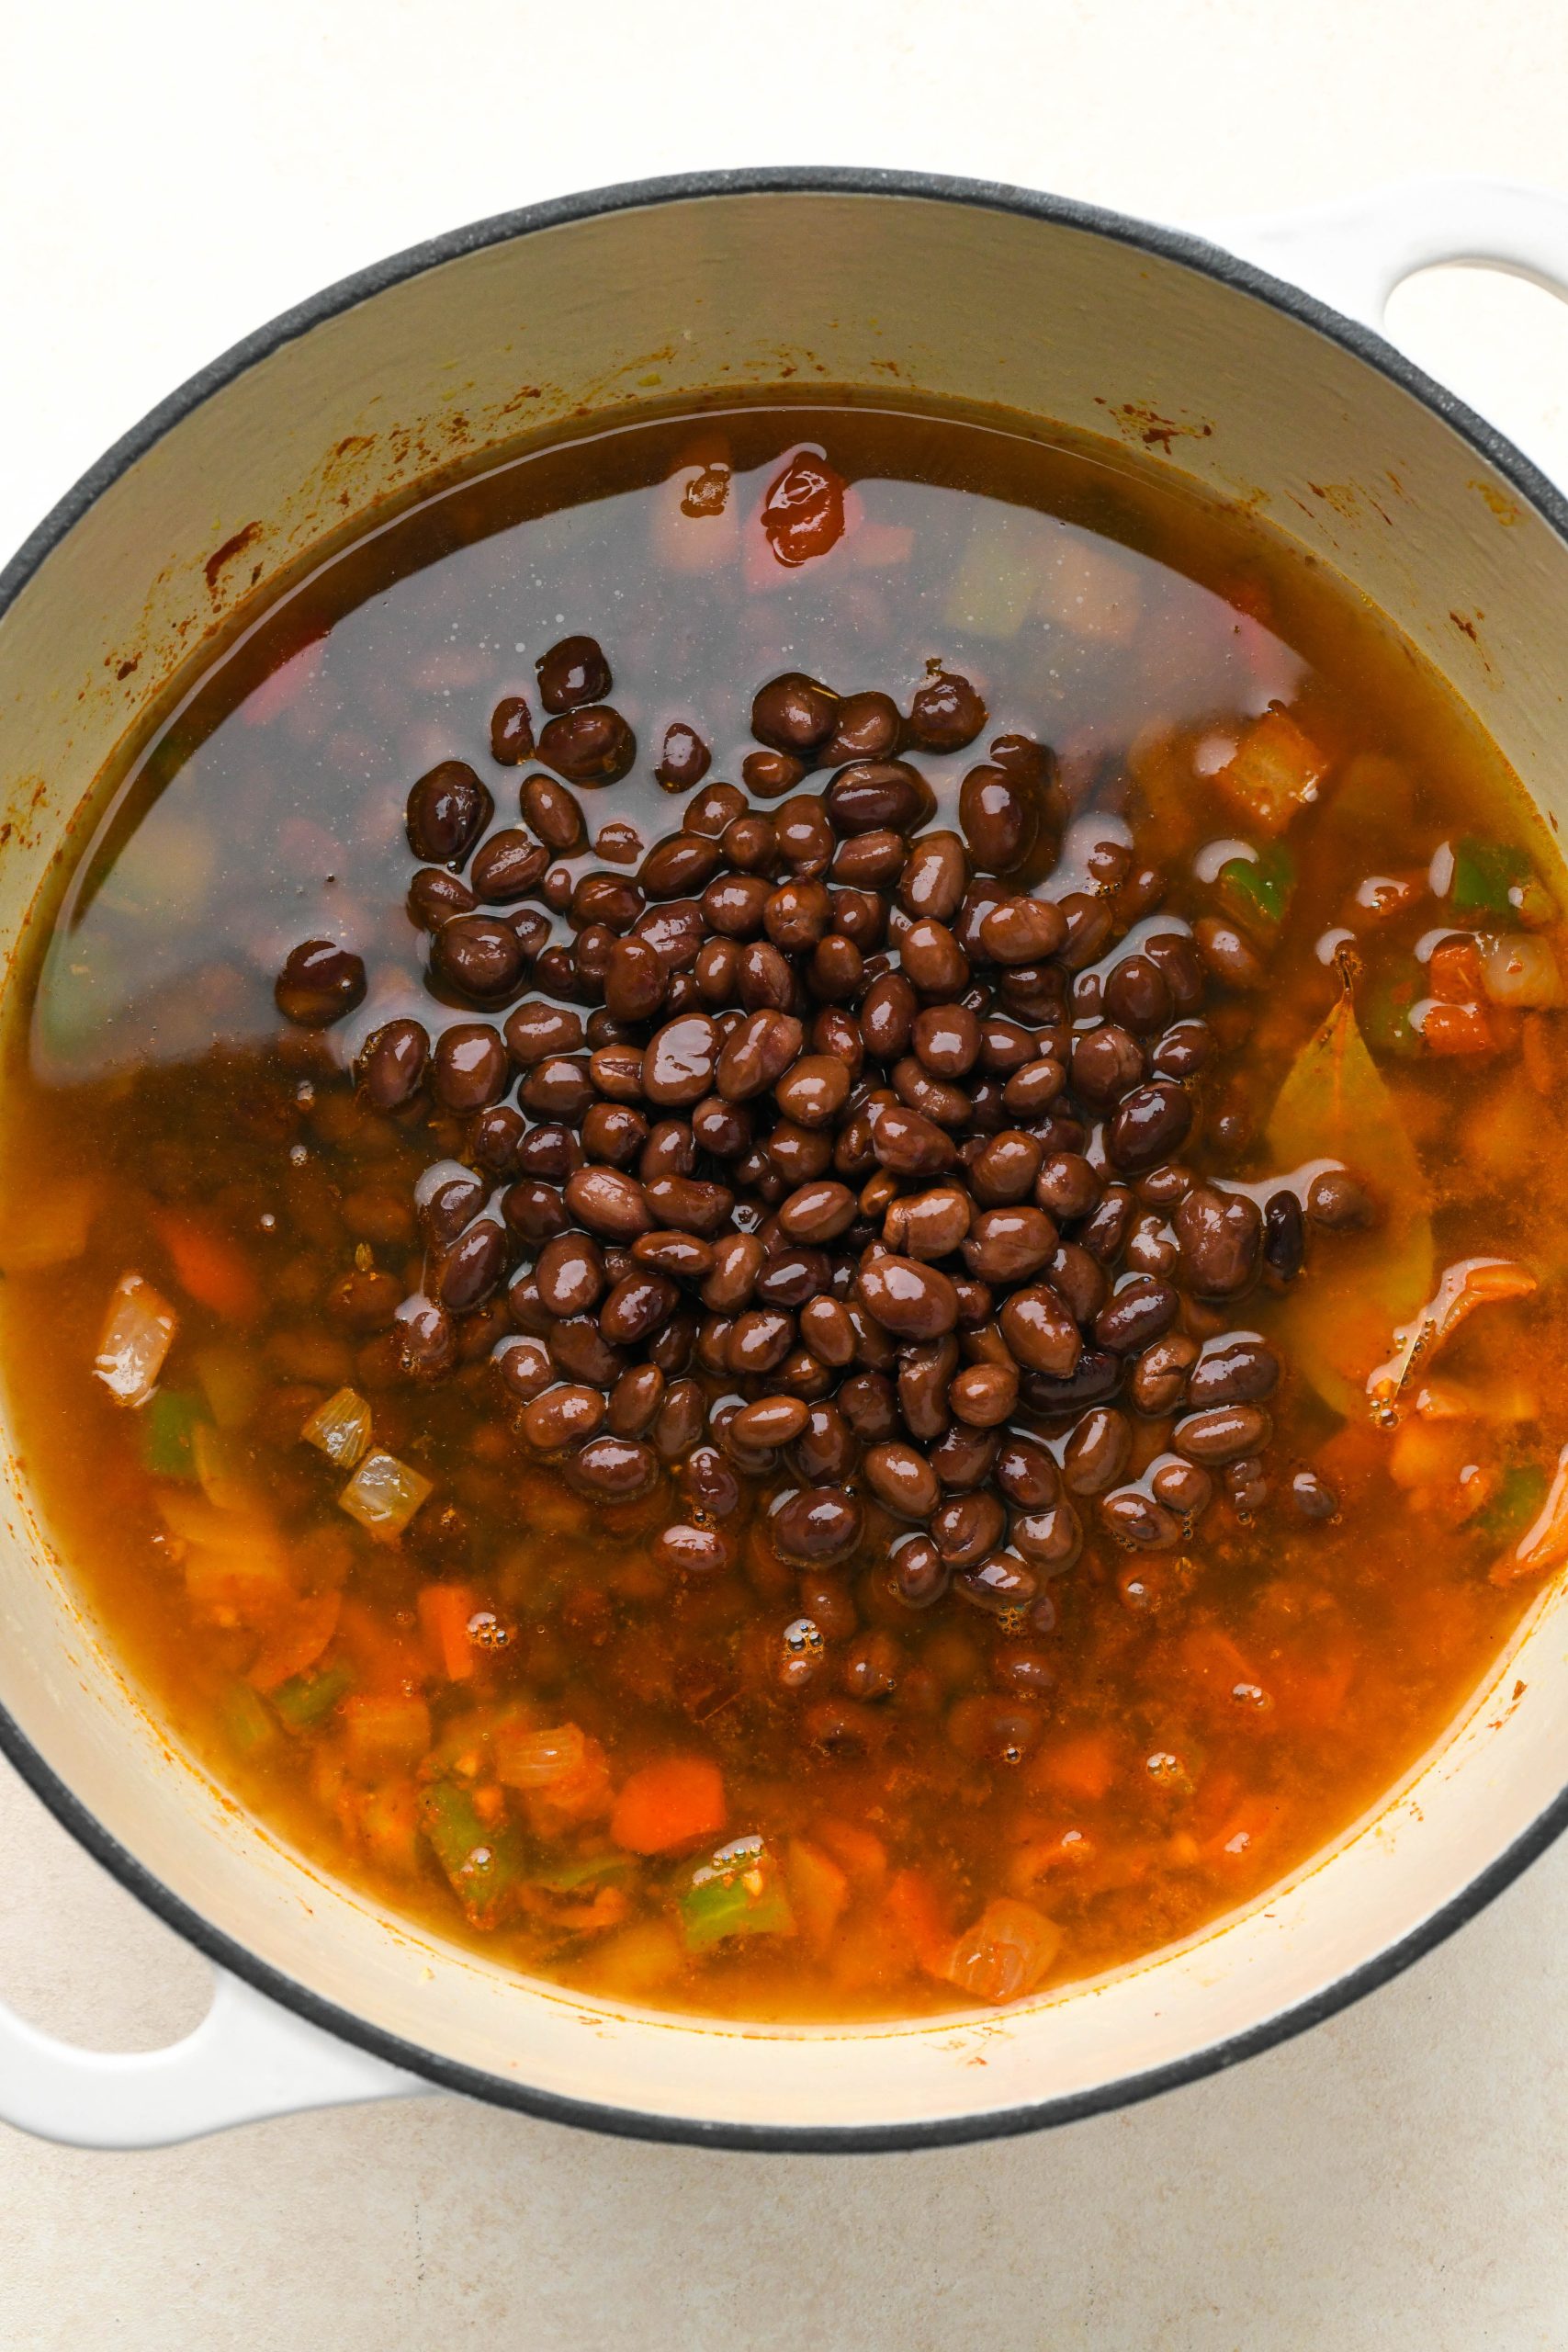 How to make vegan black bean soup: Broth and black beans added to soup pot.